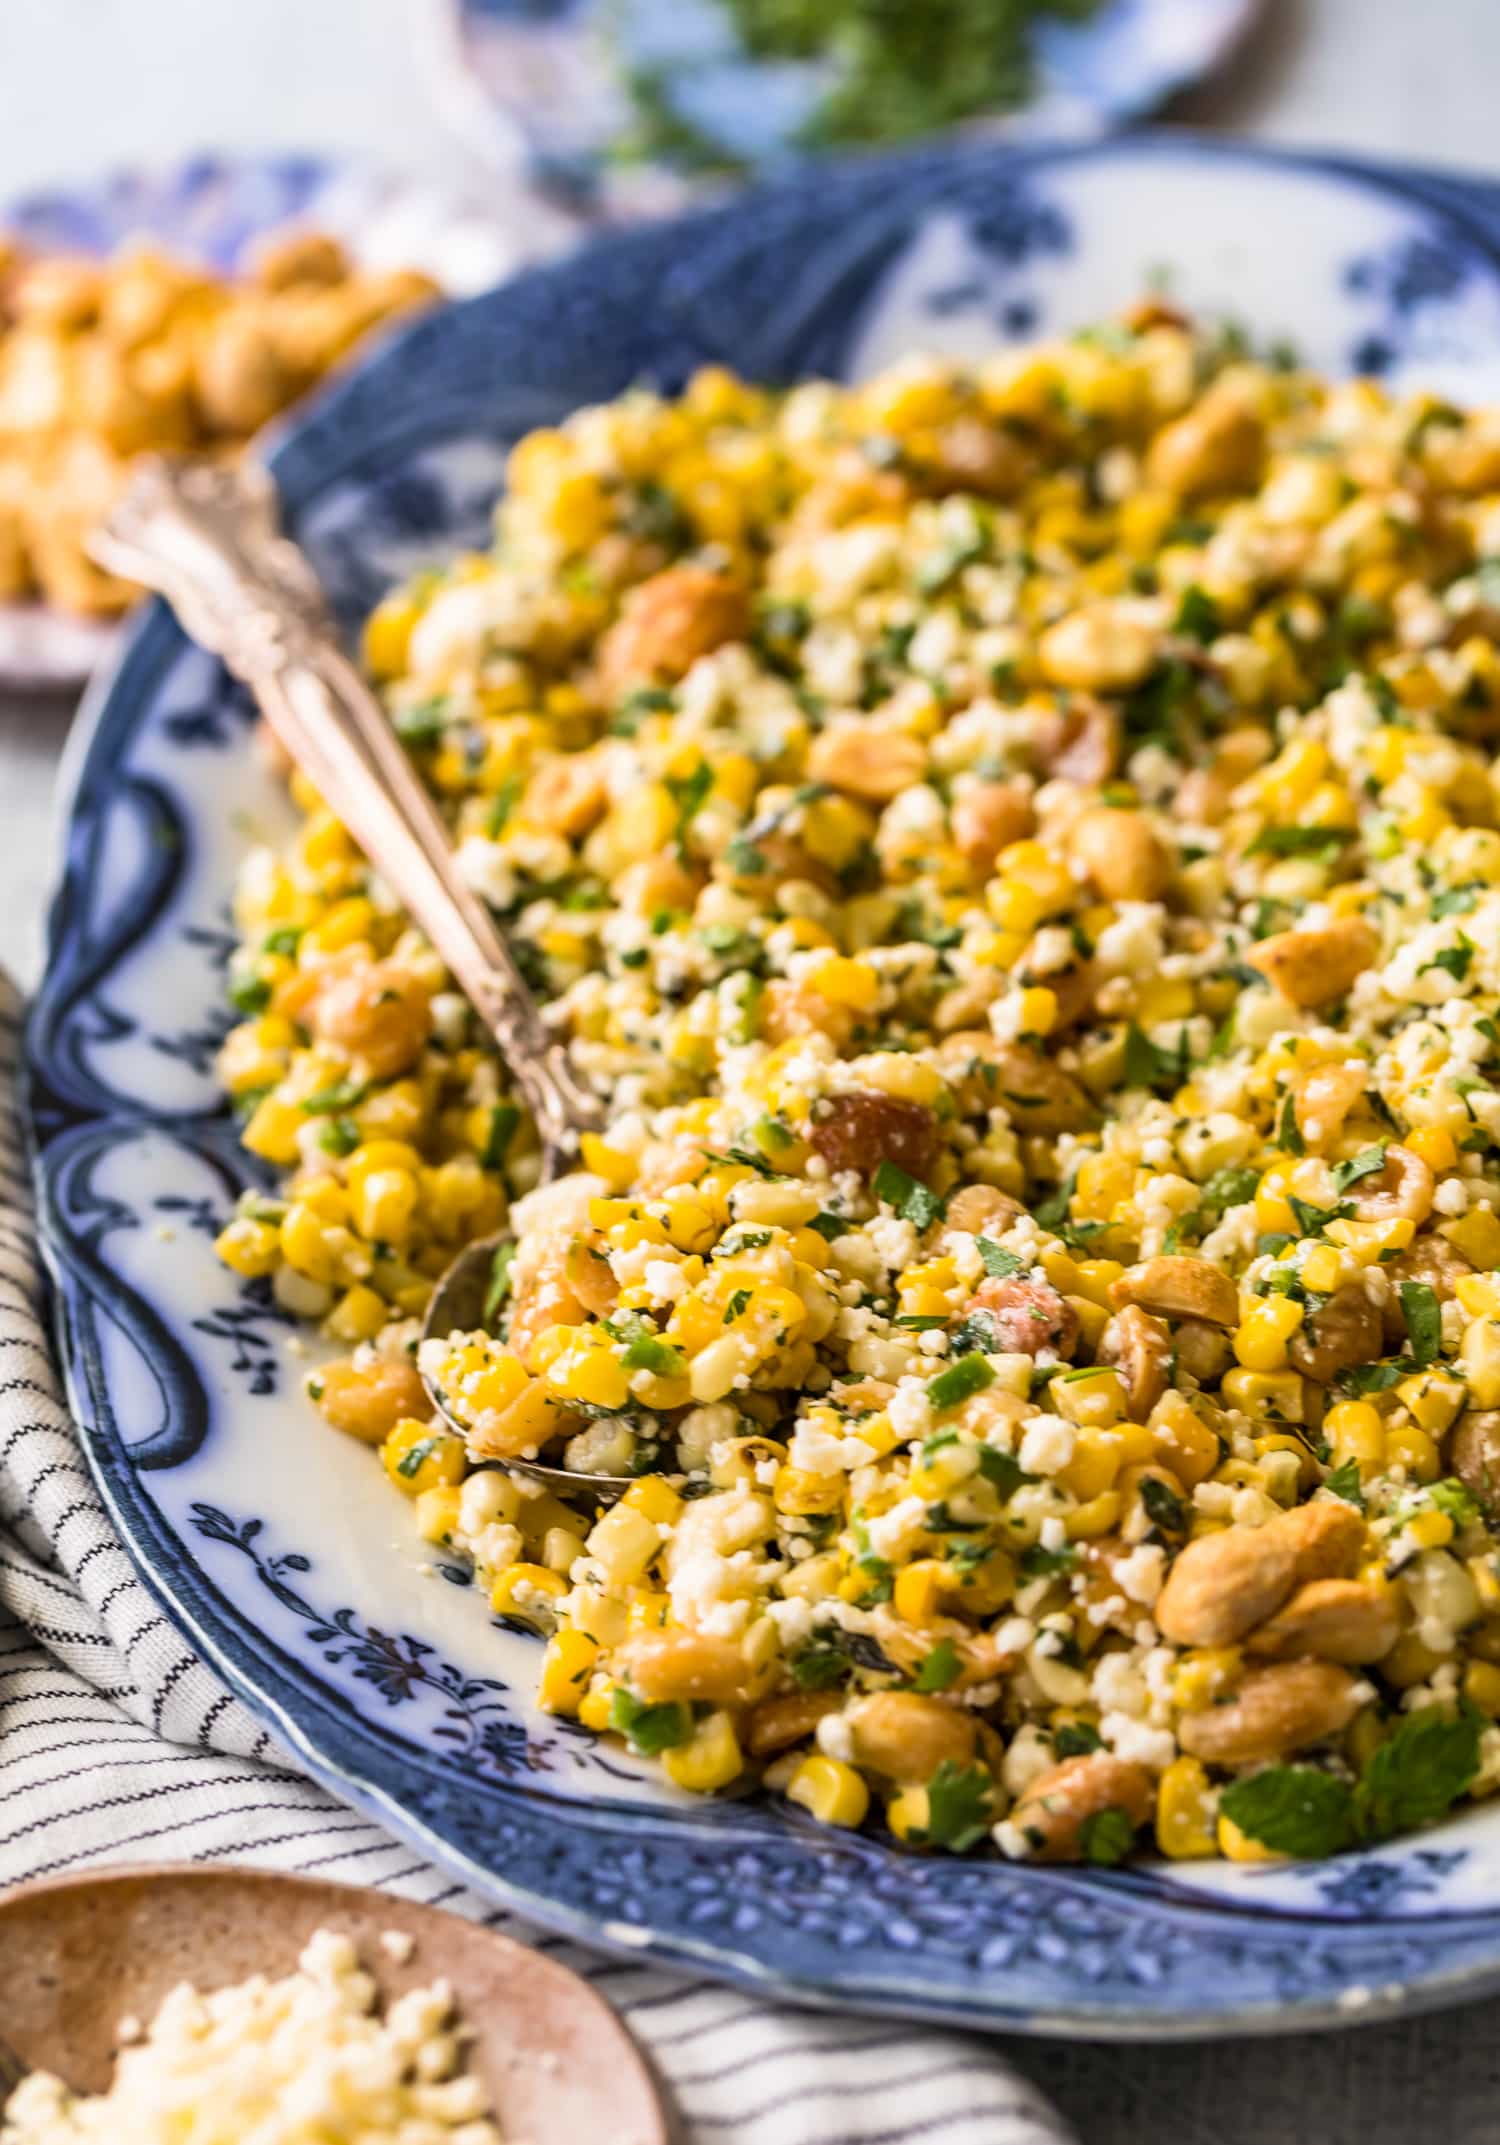 Prepared grilled corn salad on a serving plate